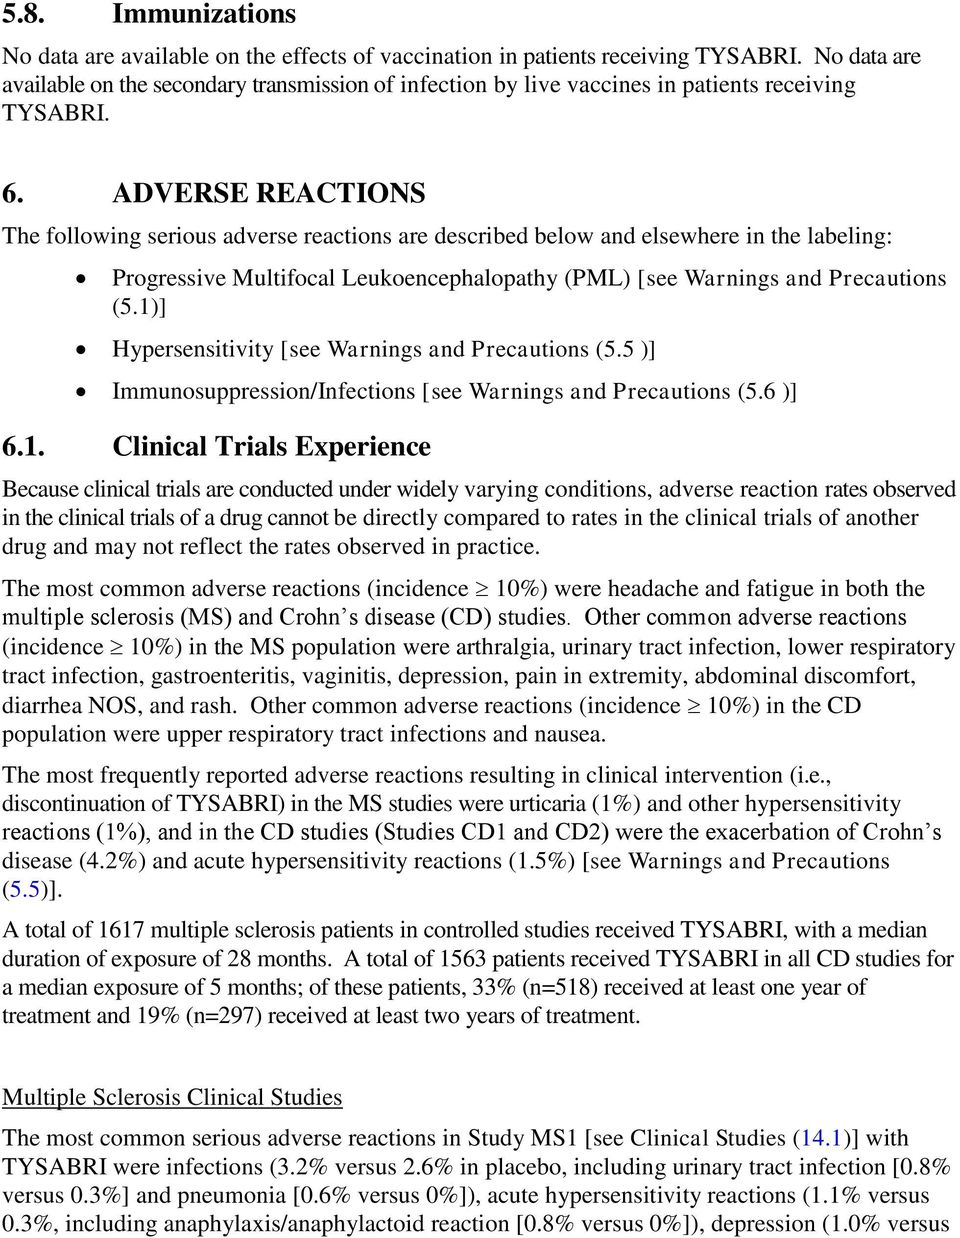 ADVERSE REACTIONS The following serious adverse reactions are described below and elsewhere in the labeling: Progressive Multifocal Leukoencephalopathy (PML) [see Warnings and Precautions (5.